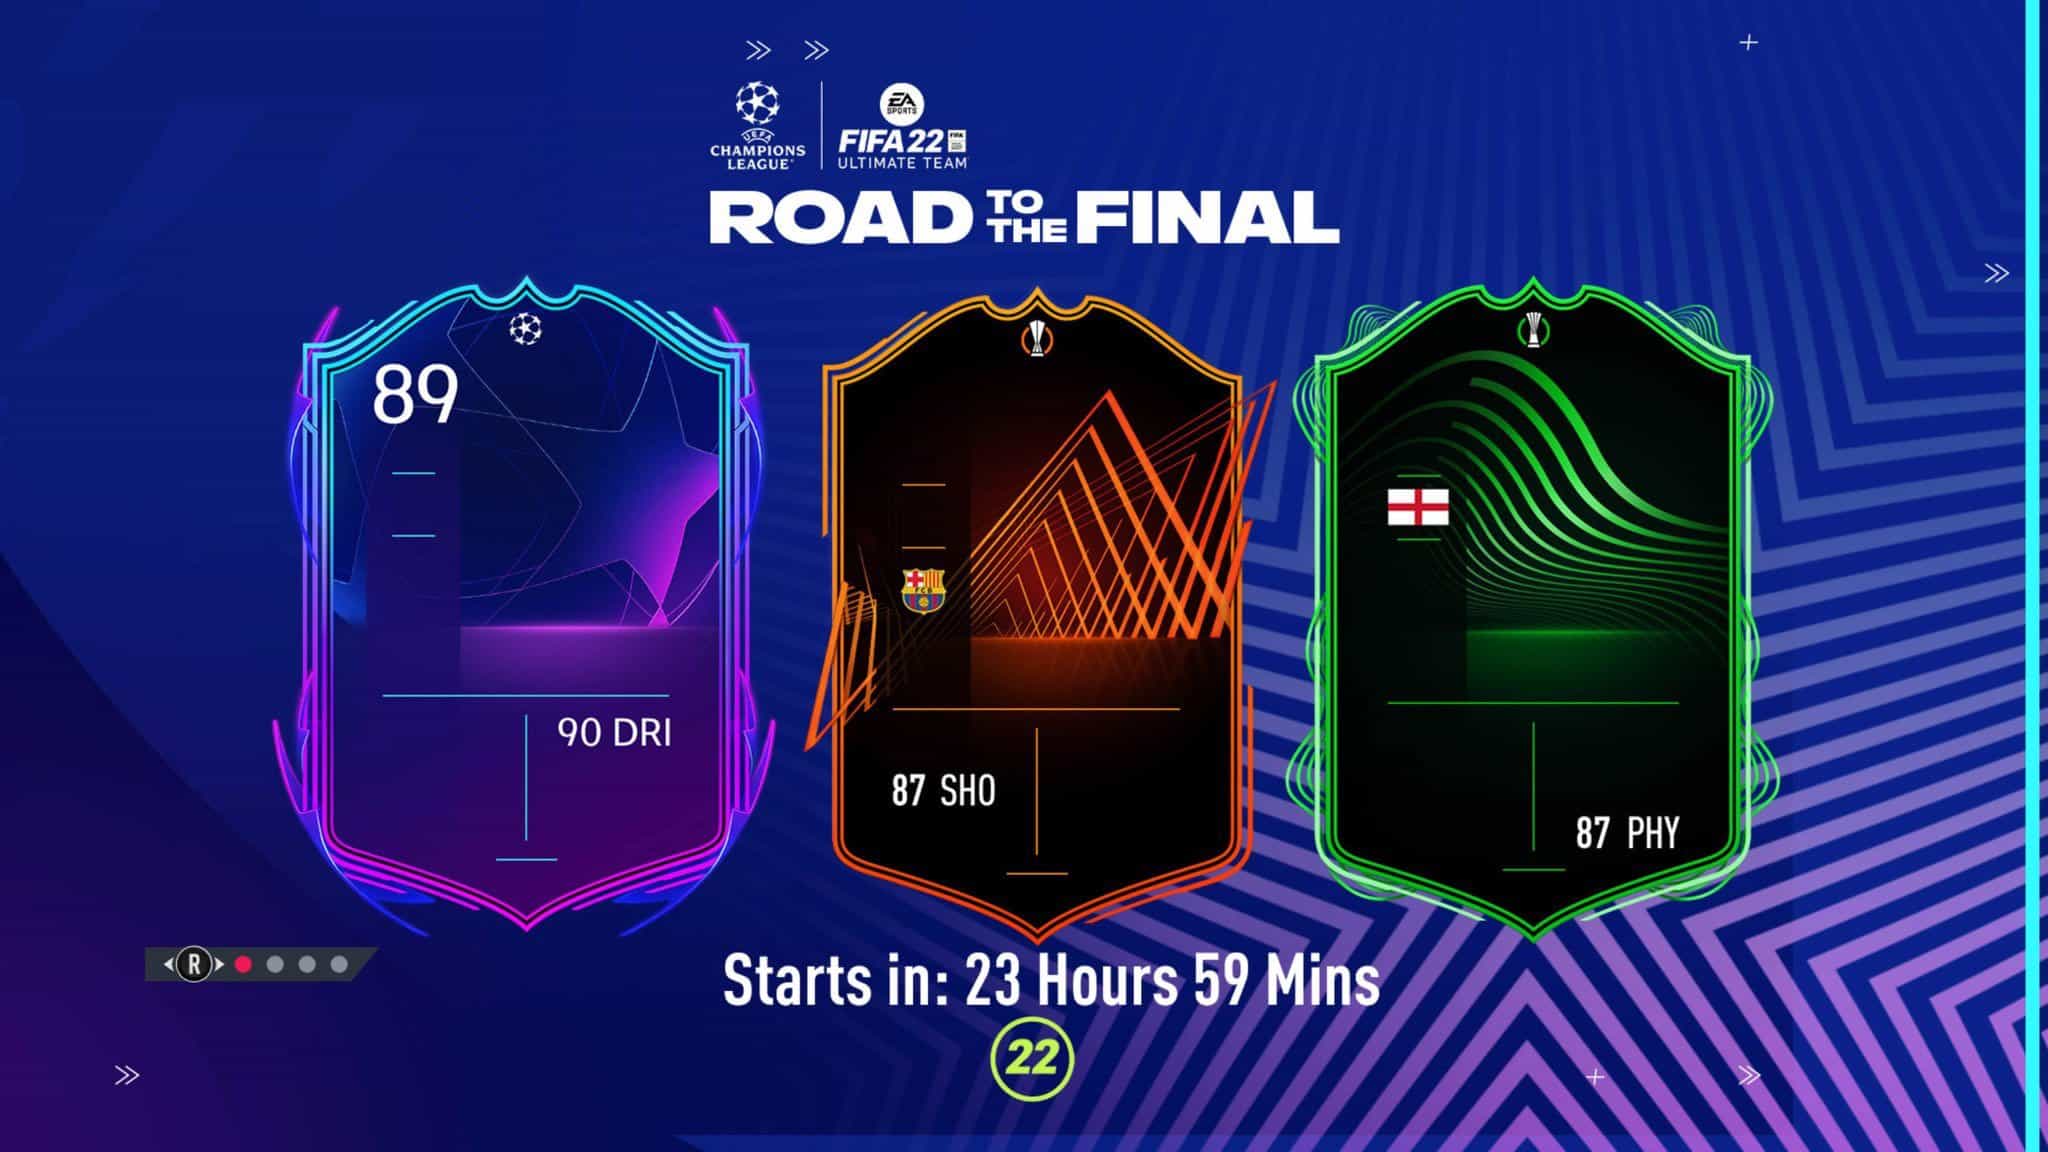 Fut Sheriff on X: 🔥Wales. Golf. Madrid In that order.😂 🚨Flashback  Gareth Bale is coming via SBC soon!🔥 He will be a flashback for Tottenham.  Stats and position are predictions! Design by @